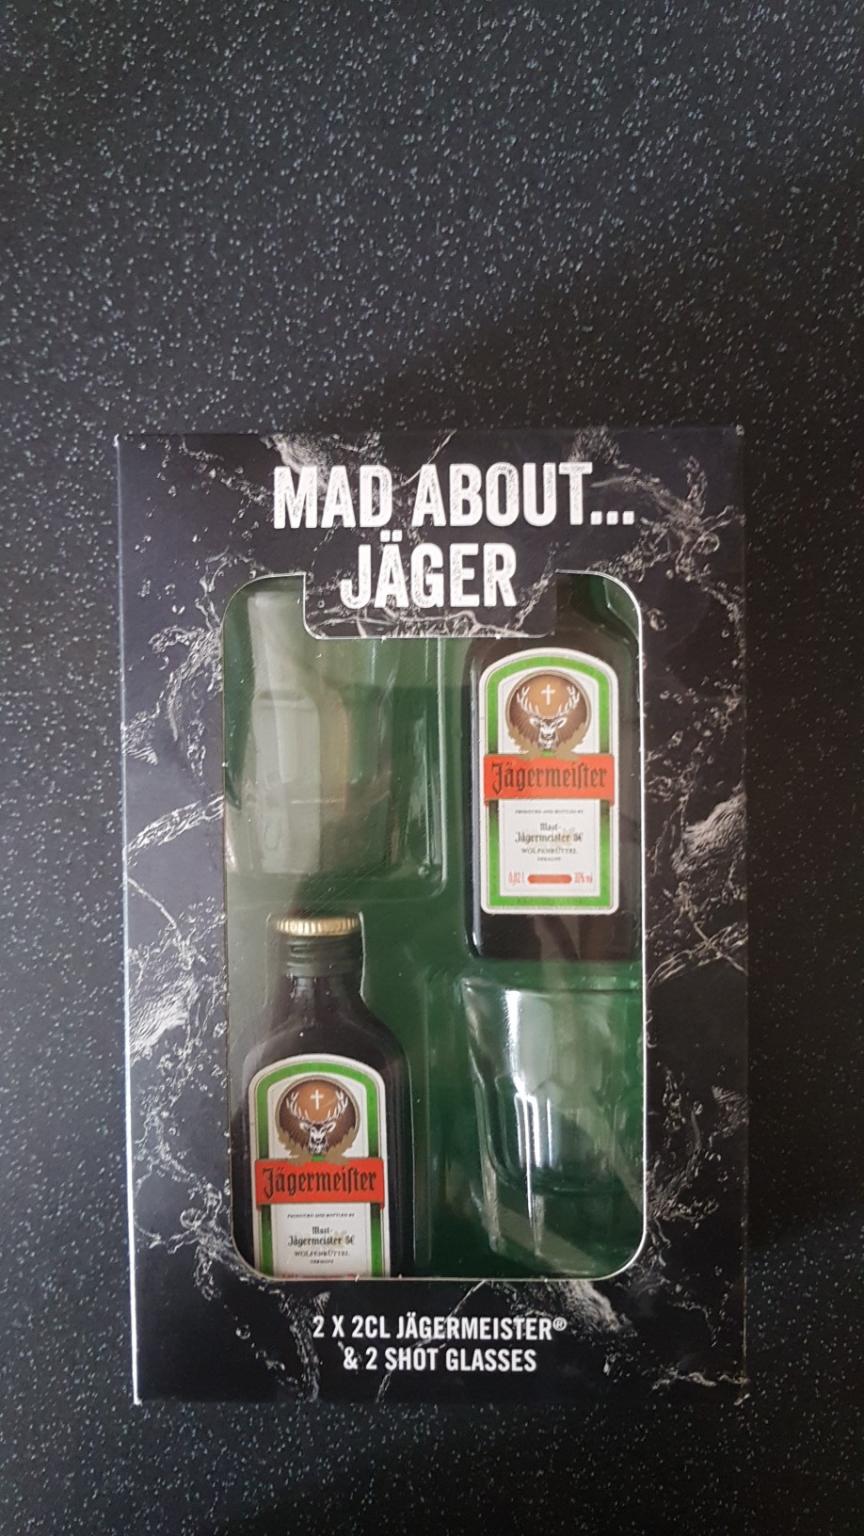 Jagermeister Gift Set Containing 2 x 2cl Jagermeister /& 2 Shot Glasses